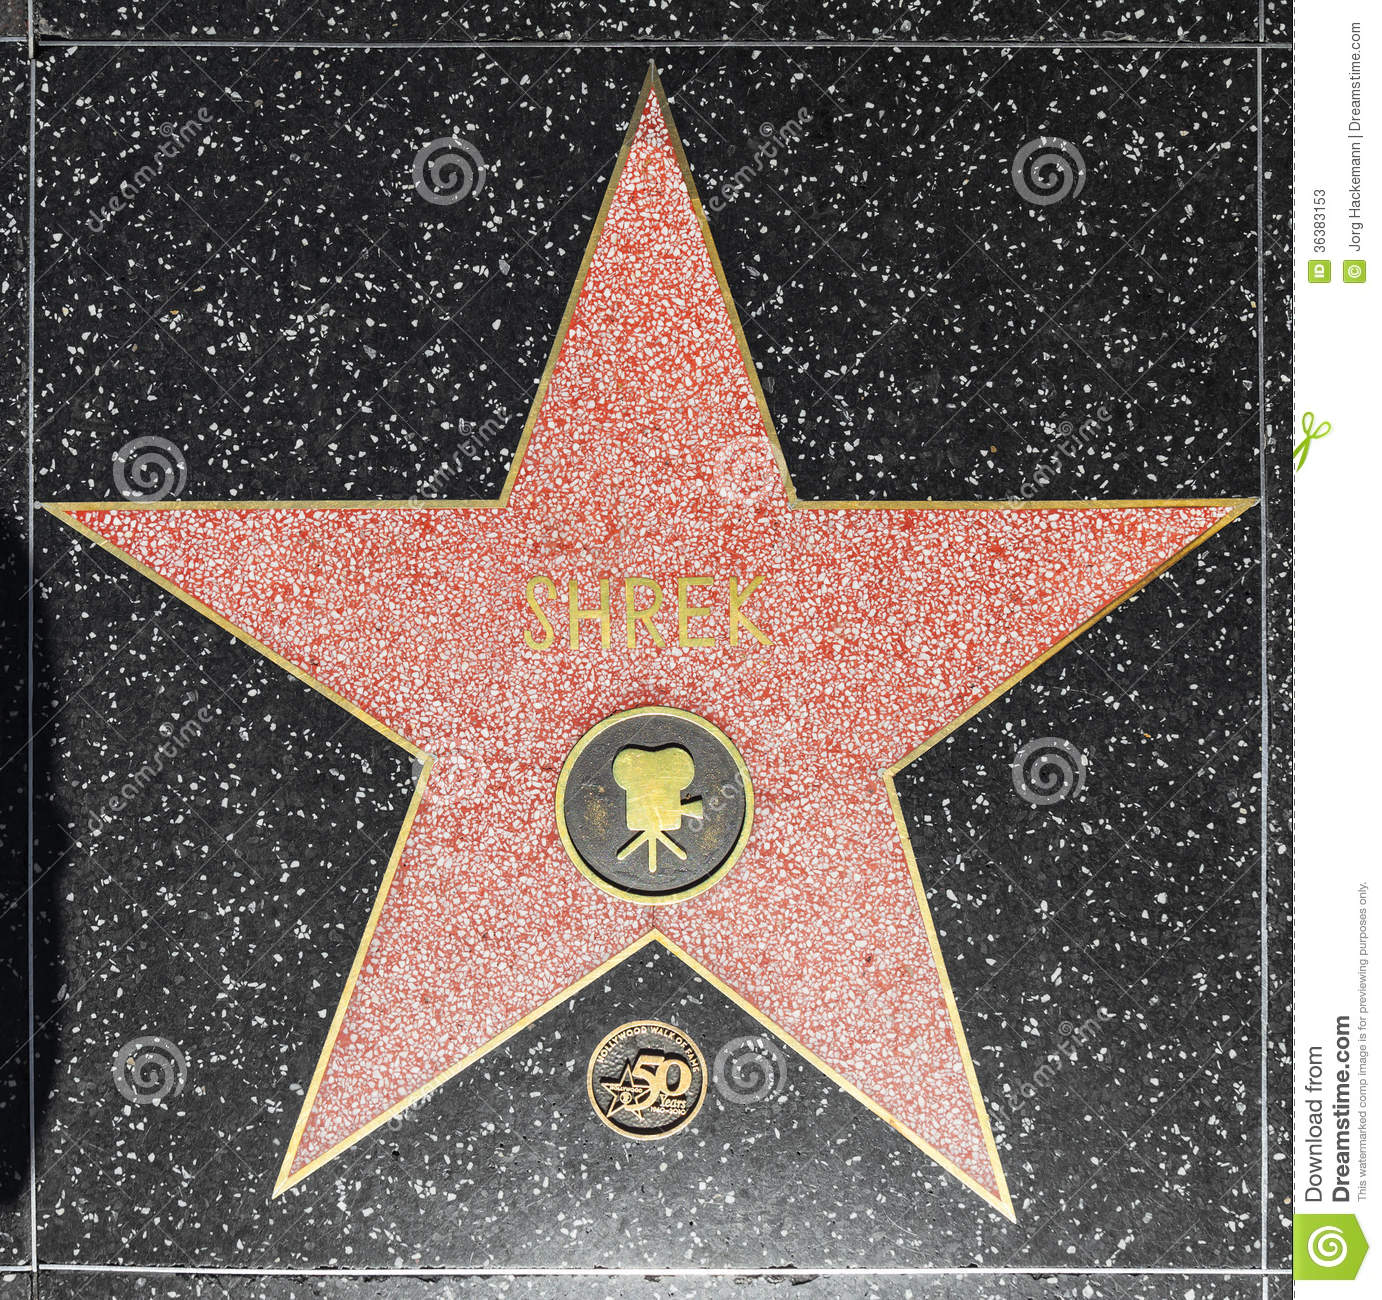 Shrek's Star On The Hollywood Walk Of Fame In Los Angeles.